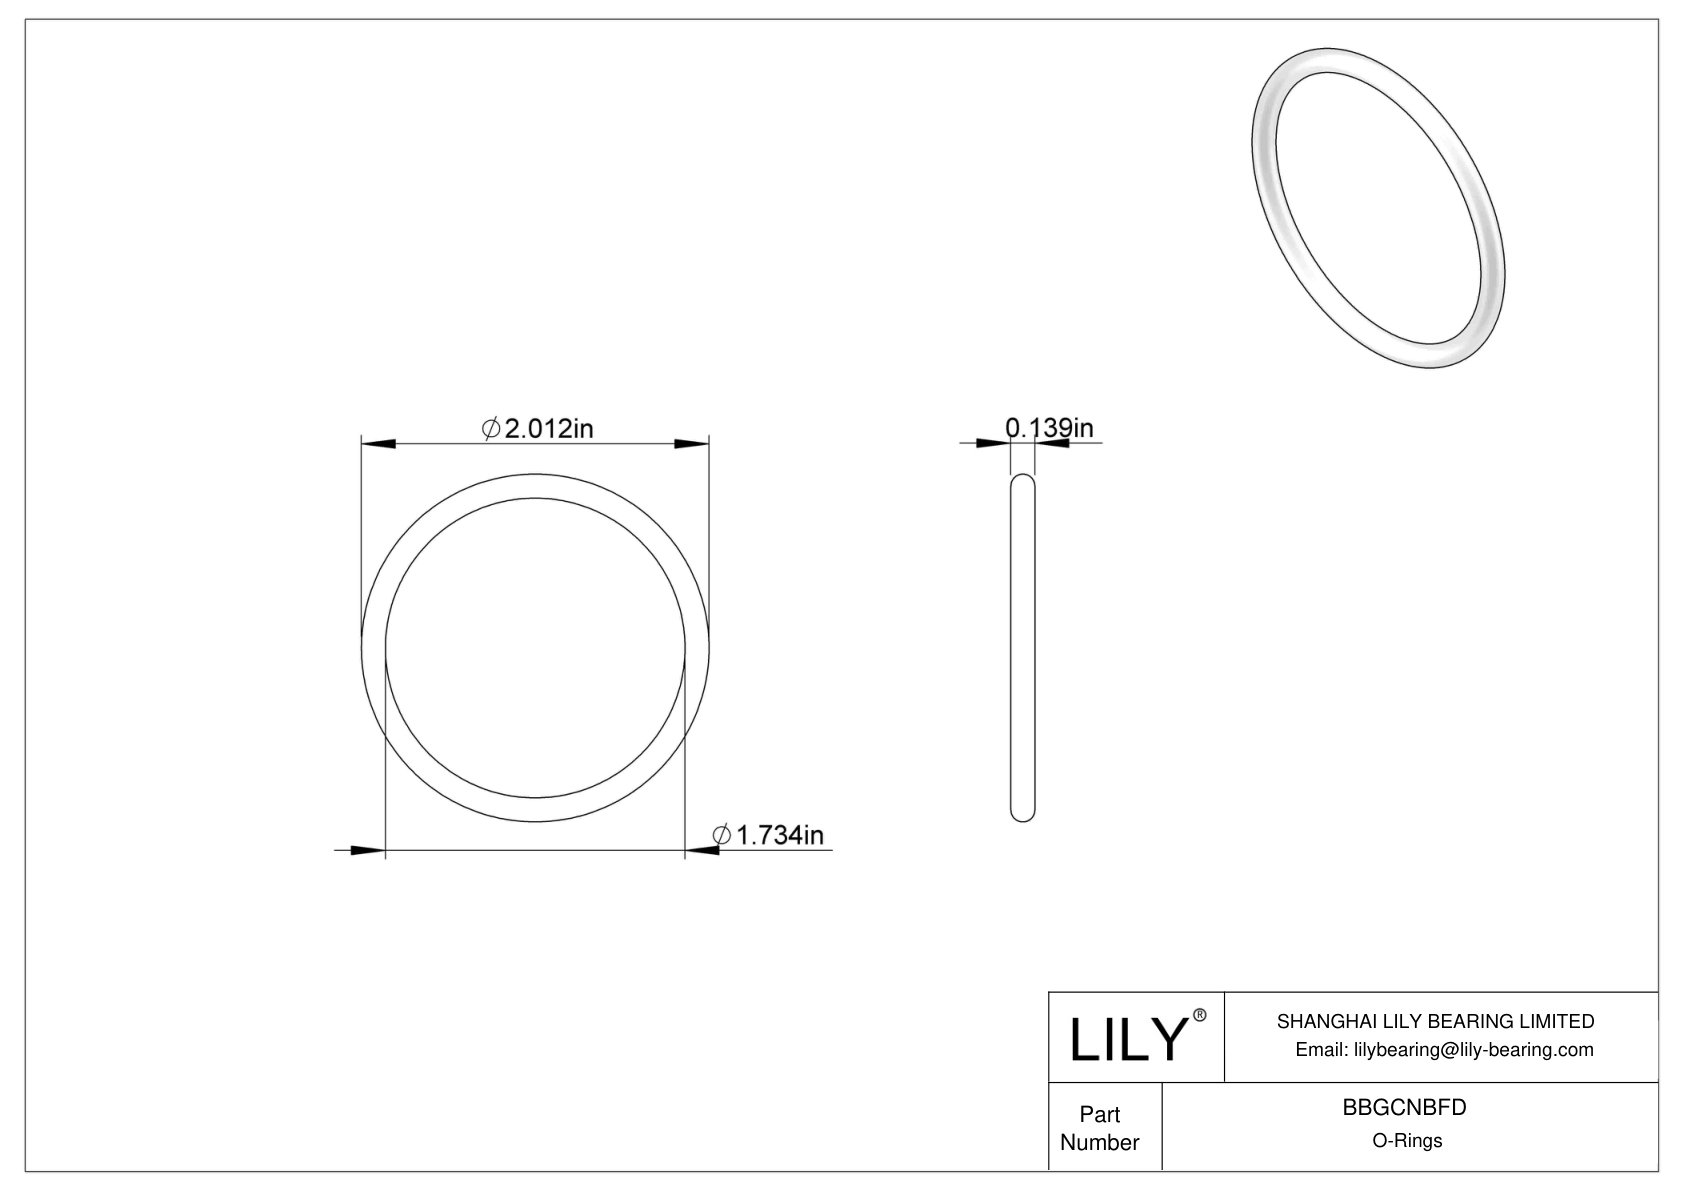 BBGCNBFD High Temperature O-Rings Round cad drawing